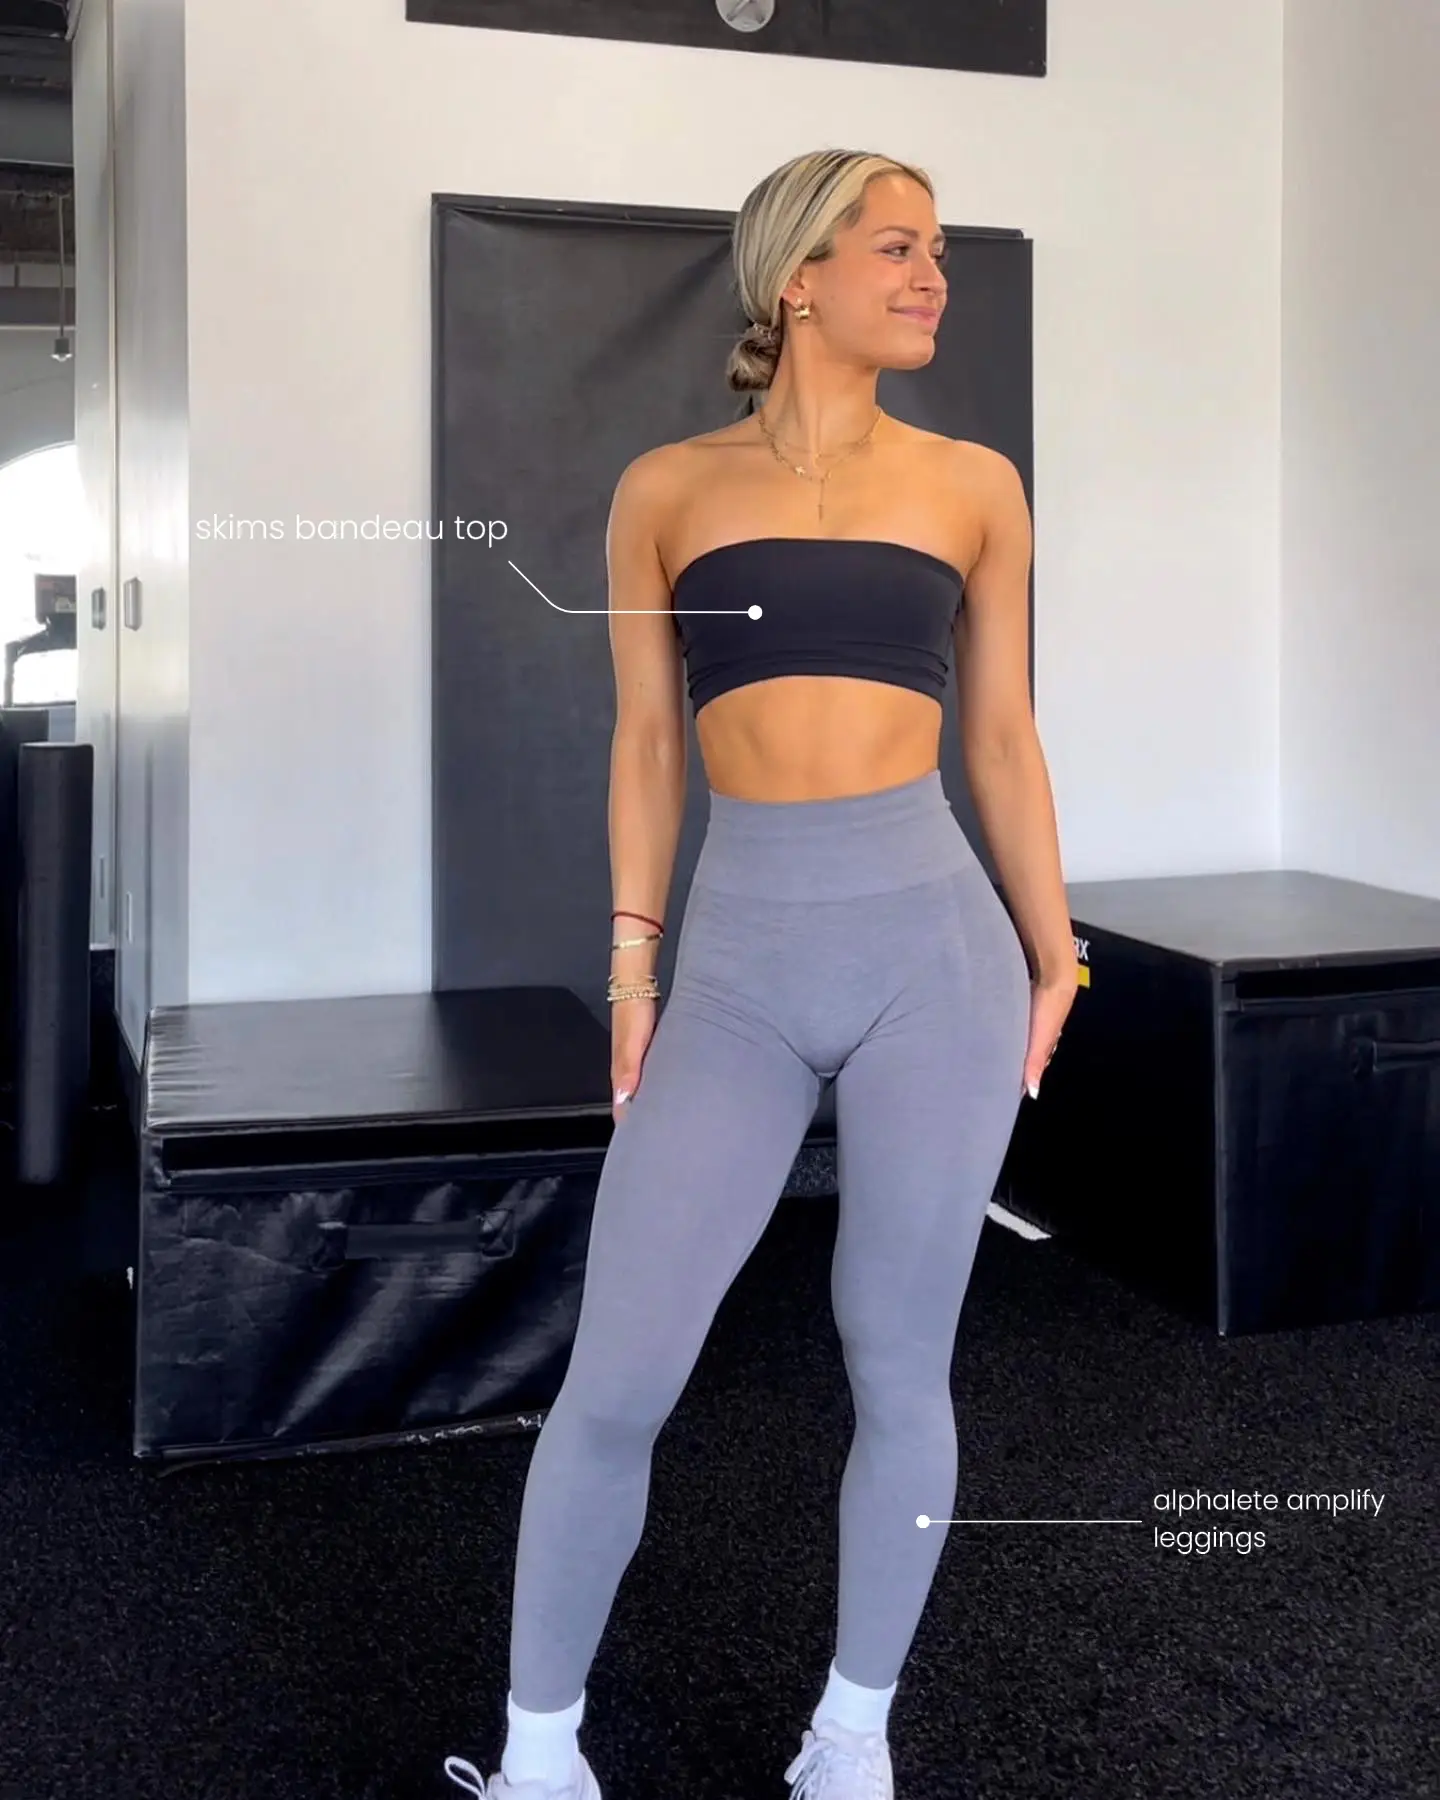 GYM FIT INSPO, Gallery posted by jaclarkins